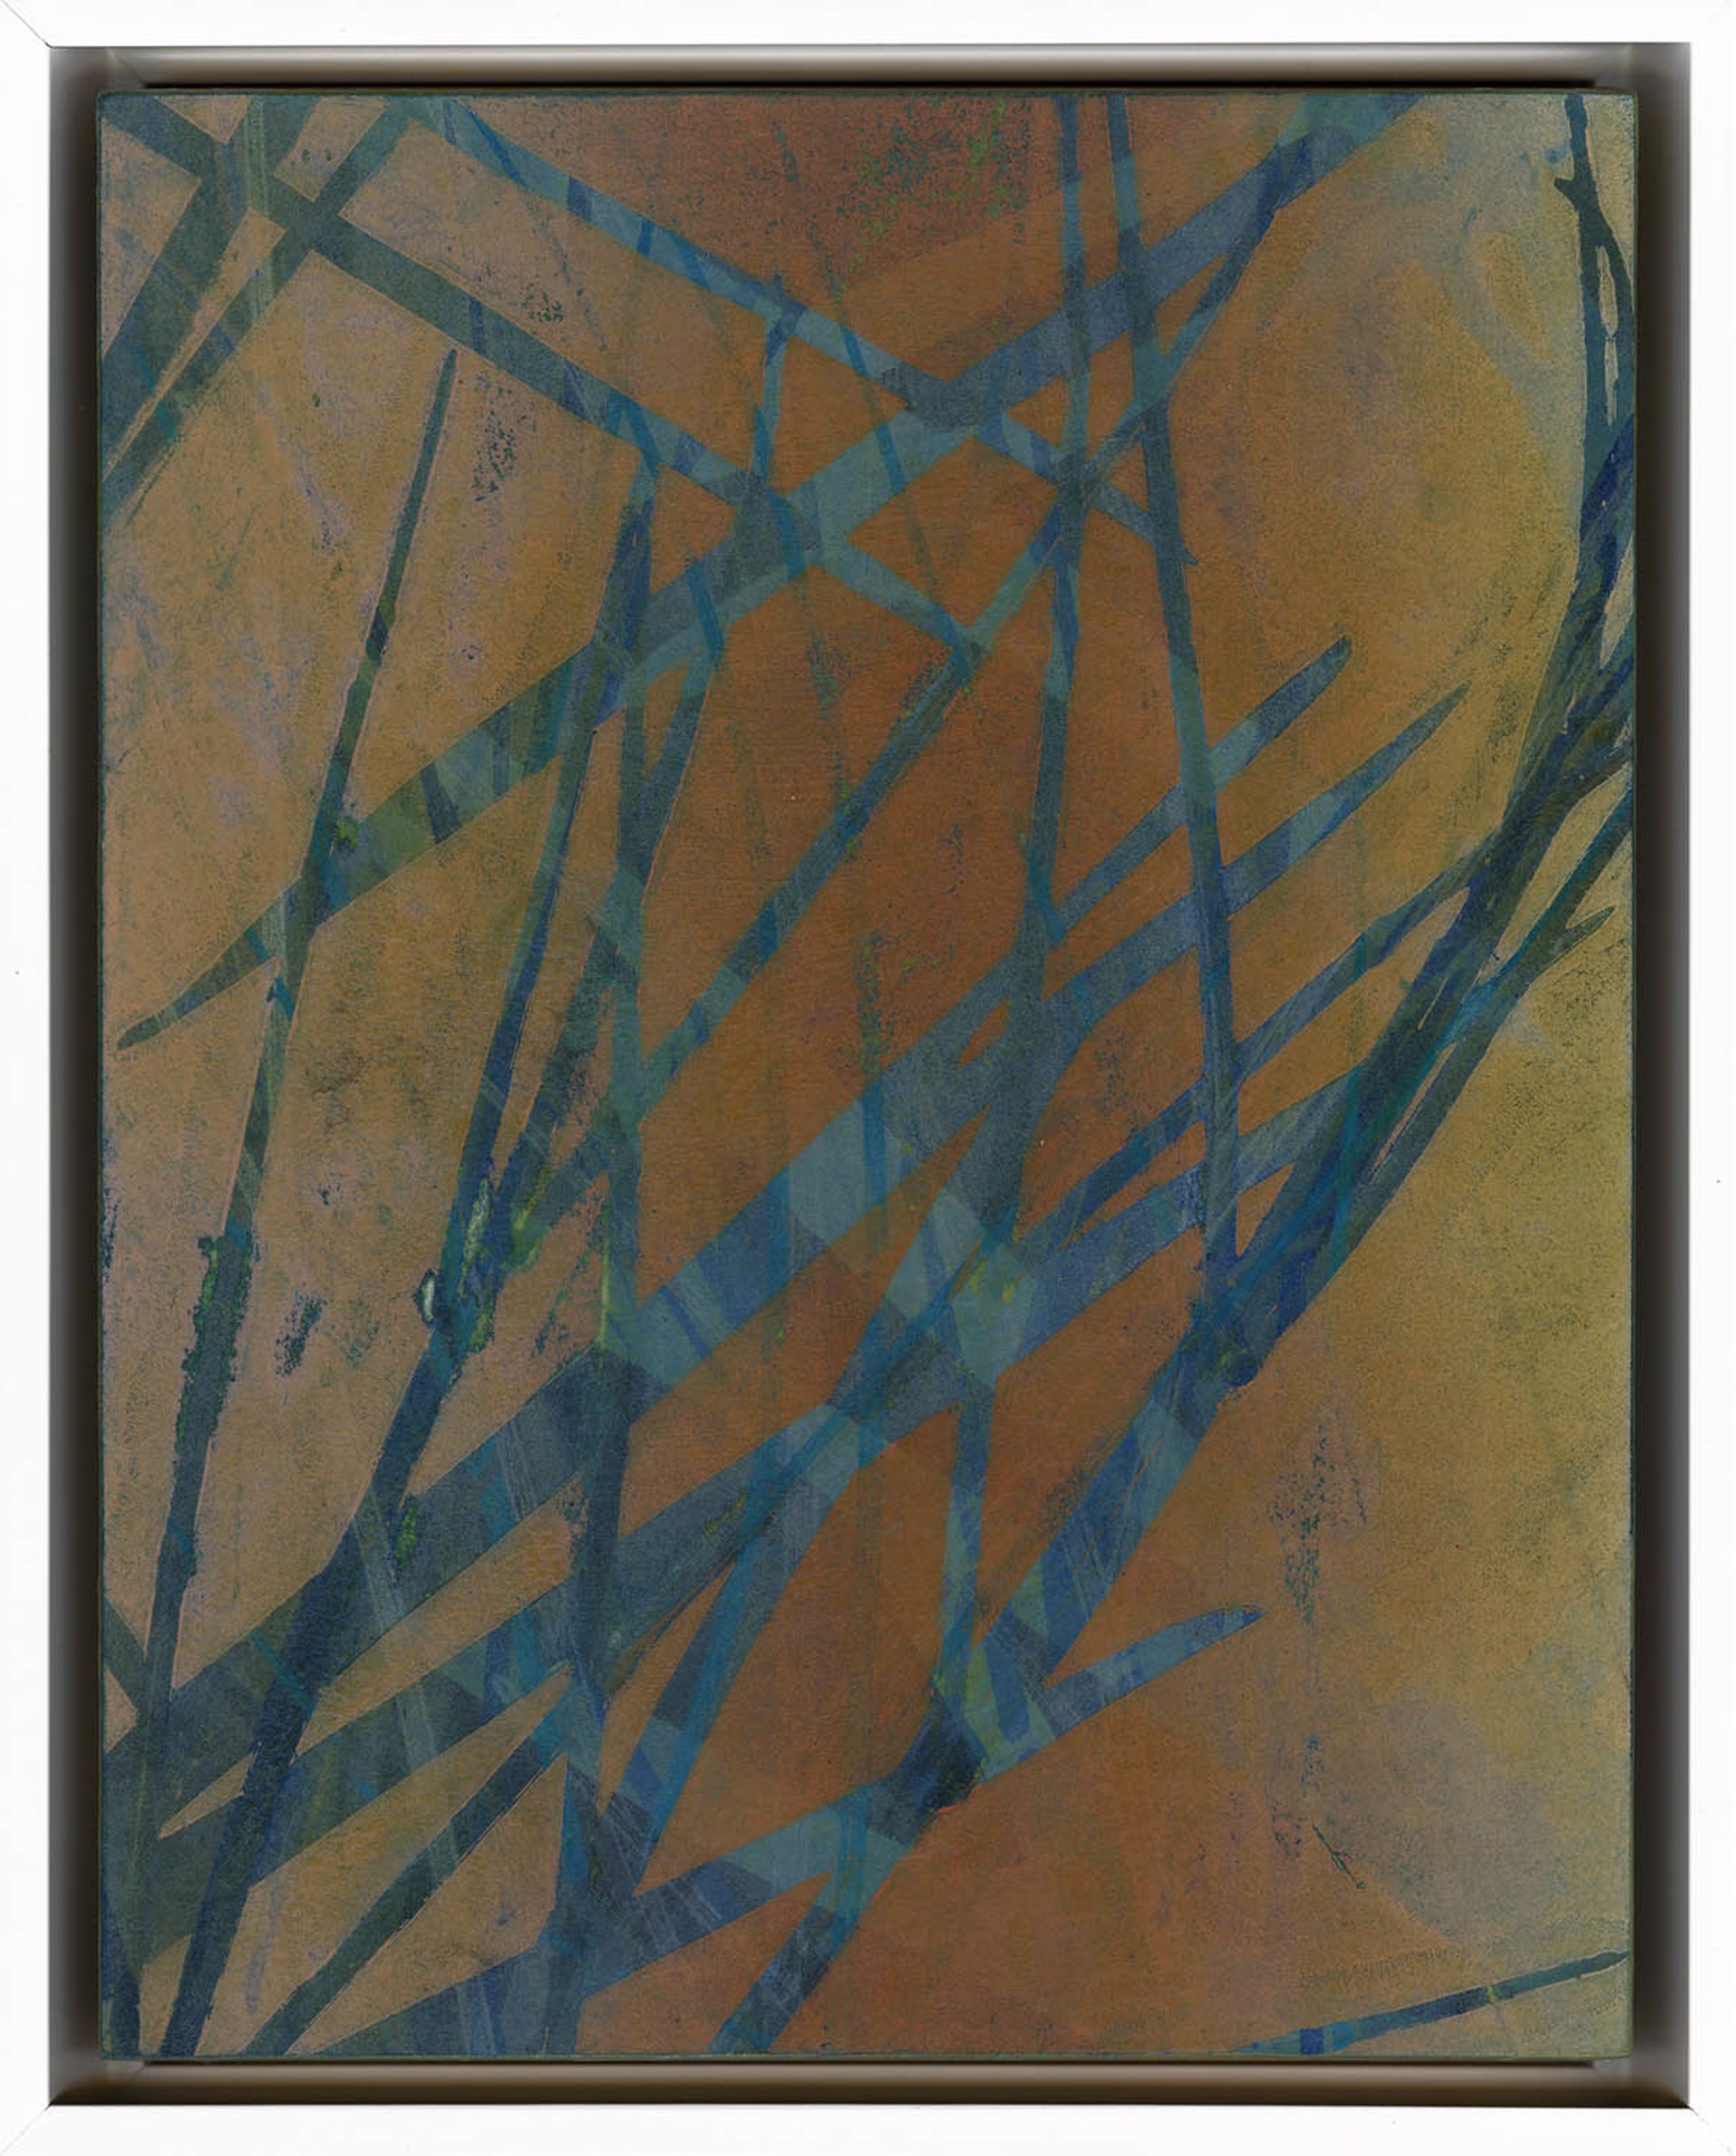 Original Abstract Monotype Print By Nina Tichava Featuring Grass Overlayed In Blues And Turquoises With Orange And Yellow Background